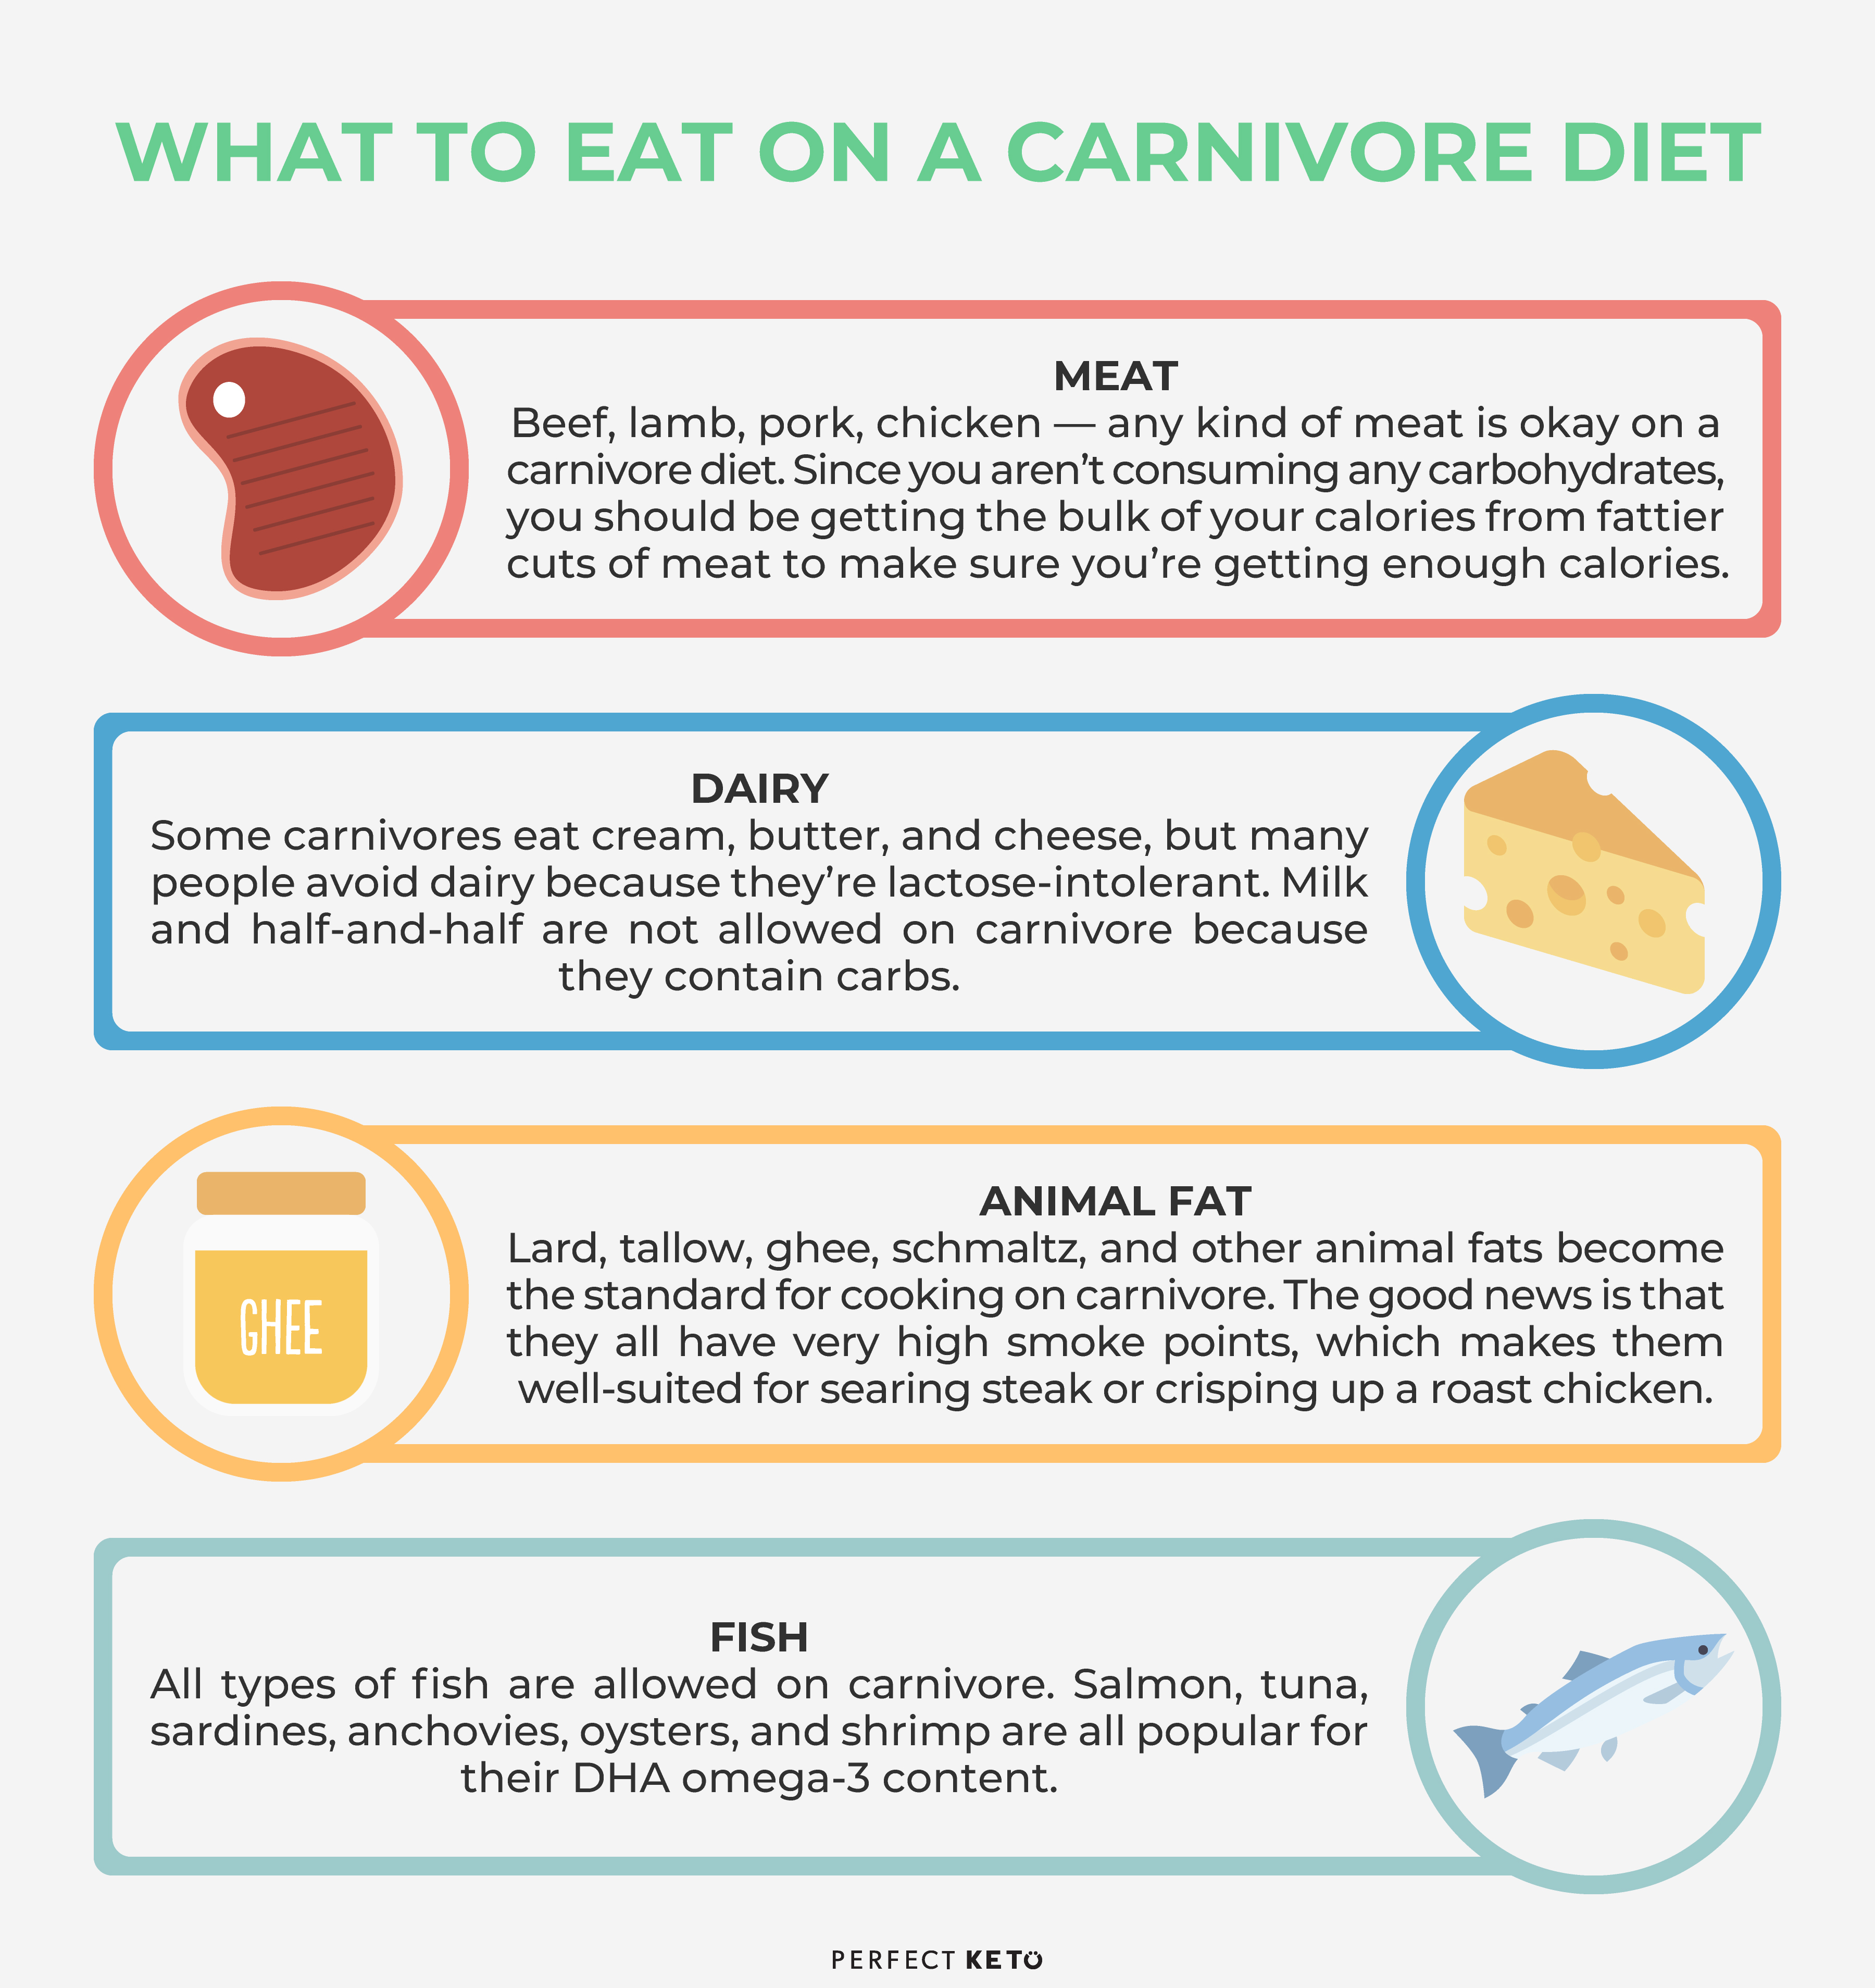 What to eat on the carnivore diet